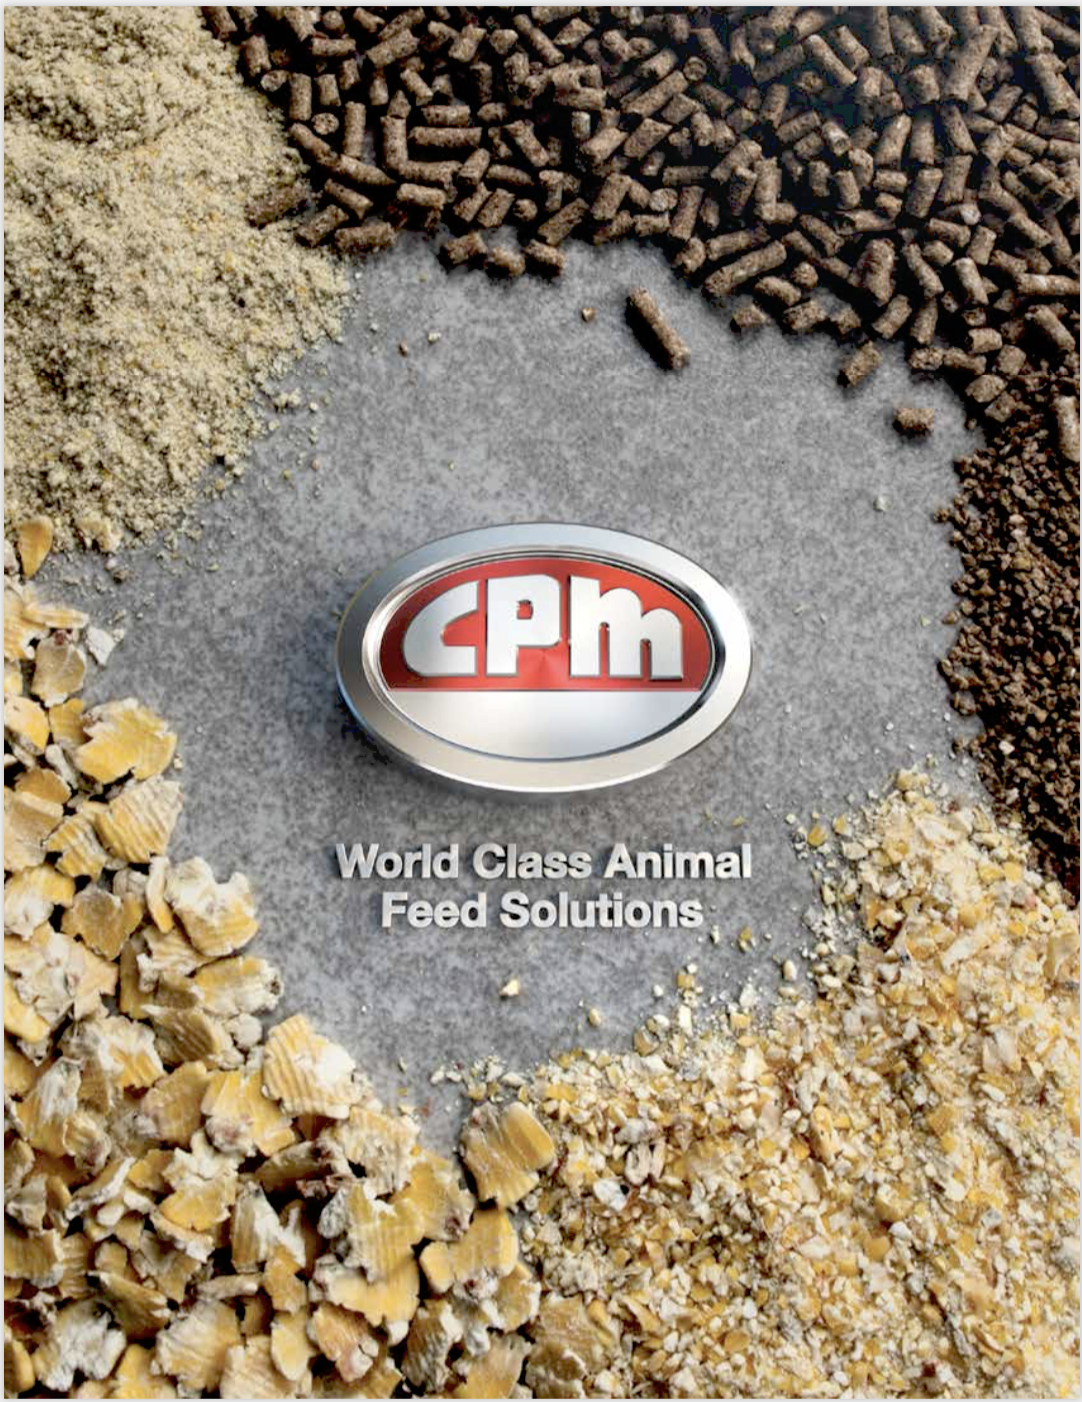 The front cover of CPM World Class Animal Feed Solutions brochure with the CPM logo surrounded by various types of processed animal feed.